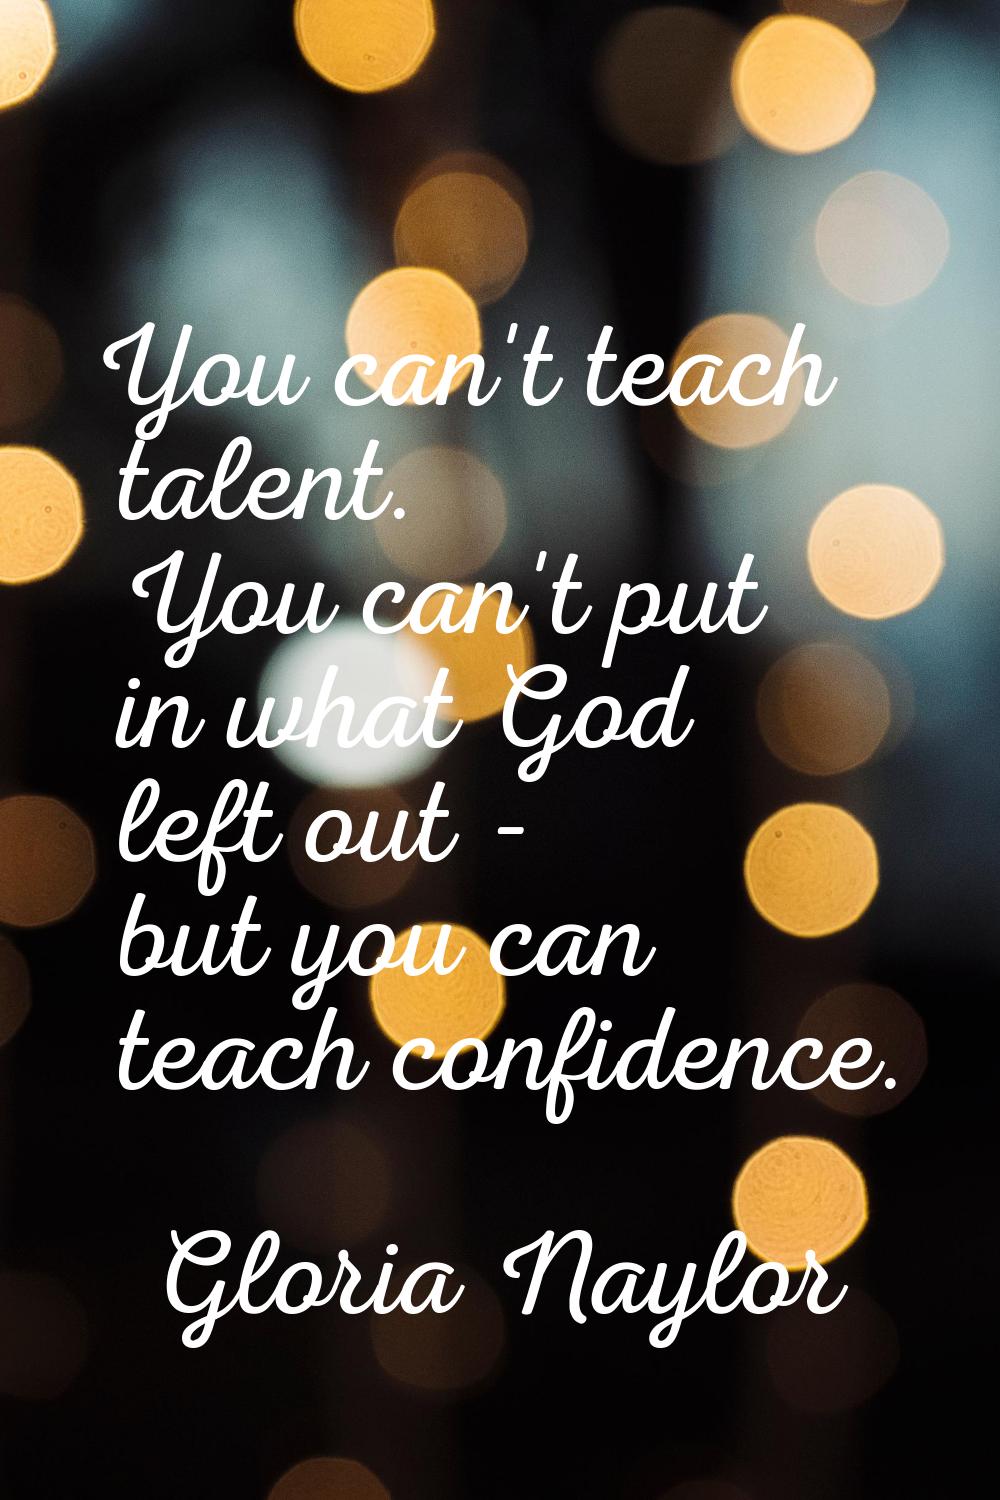 You can't teach talent. You can't put in what God left out - but you can teach confidence.